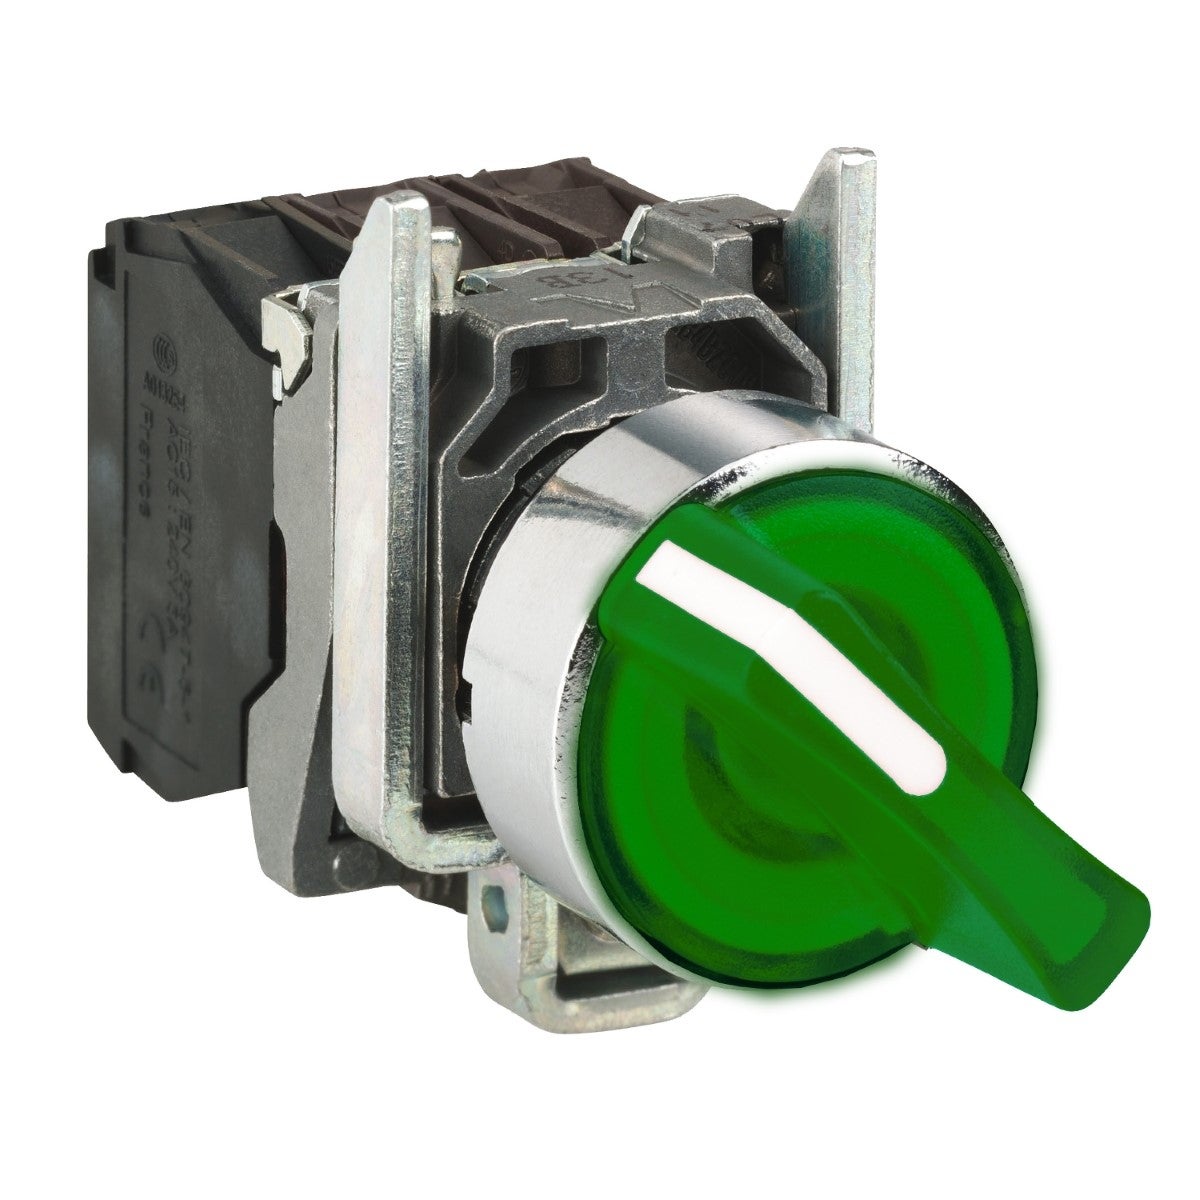 Illuminated selector switch, metal, green, Ã˜22, 2 positions, stay put, 230...240 V AC, 1 NO + 1 NC